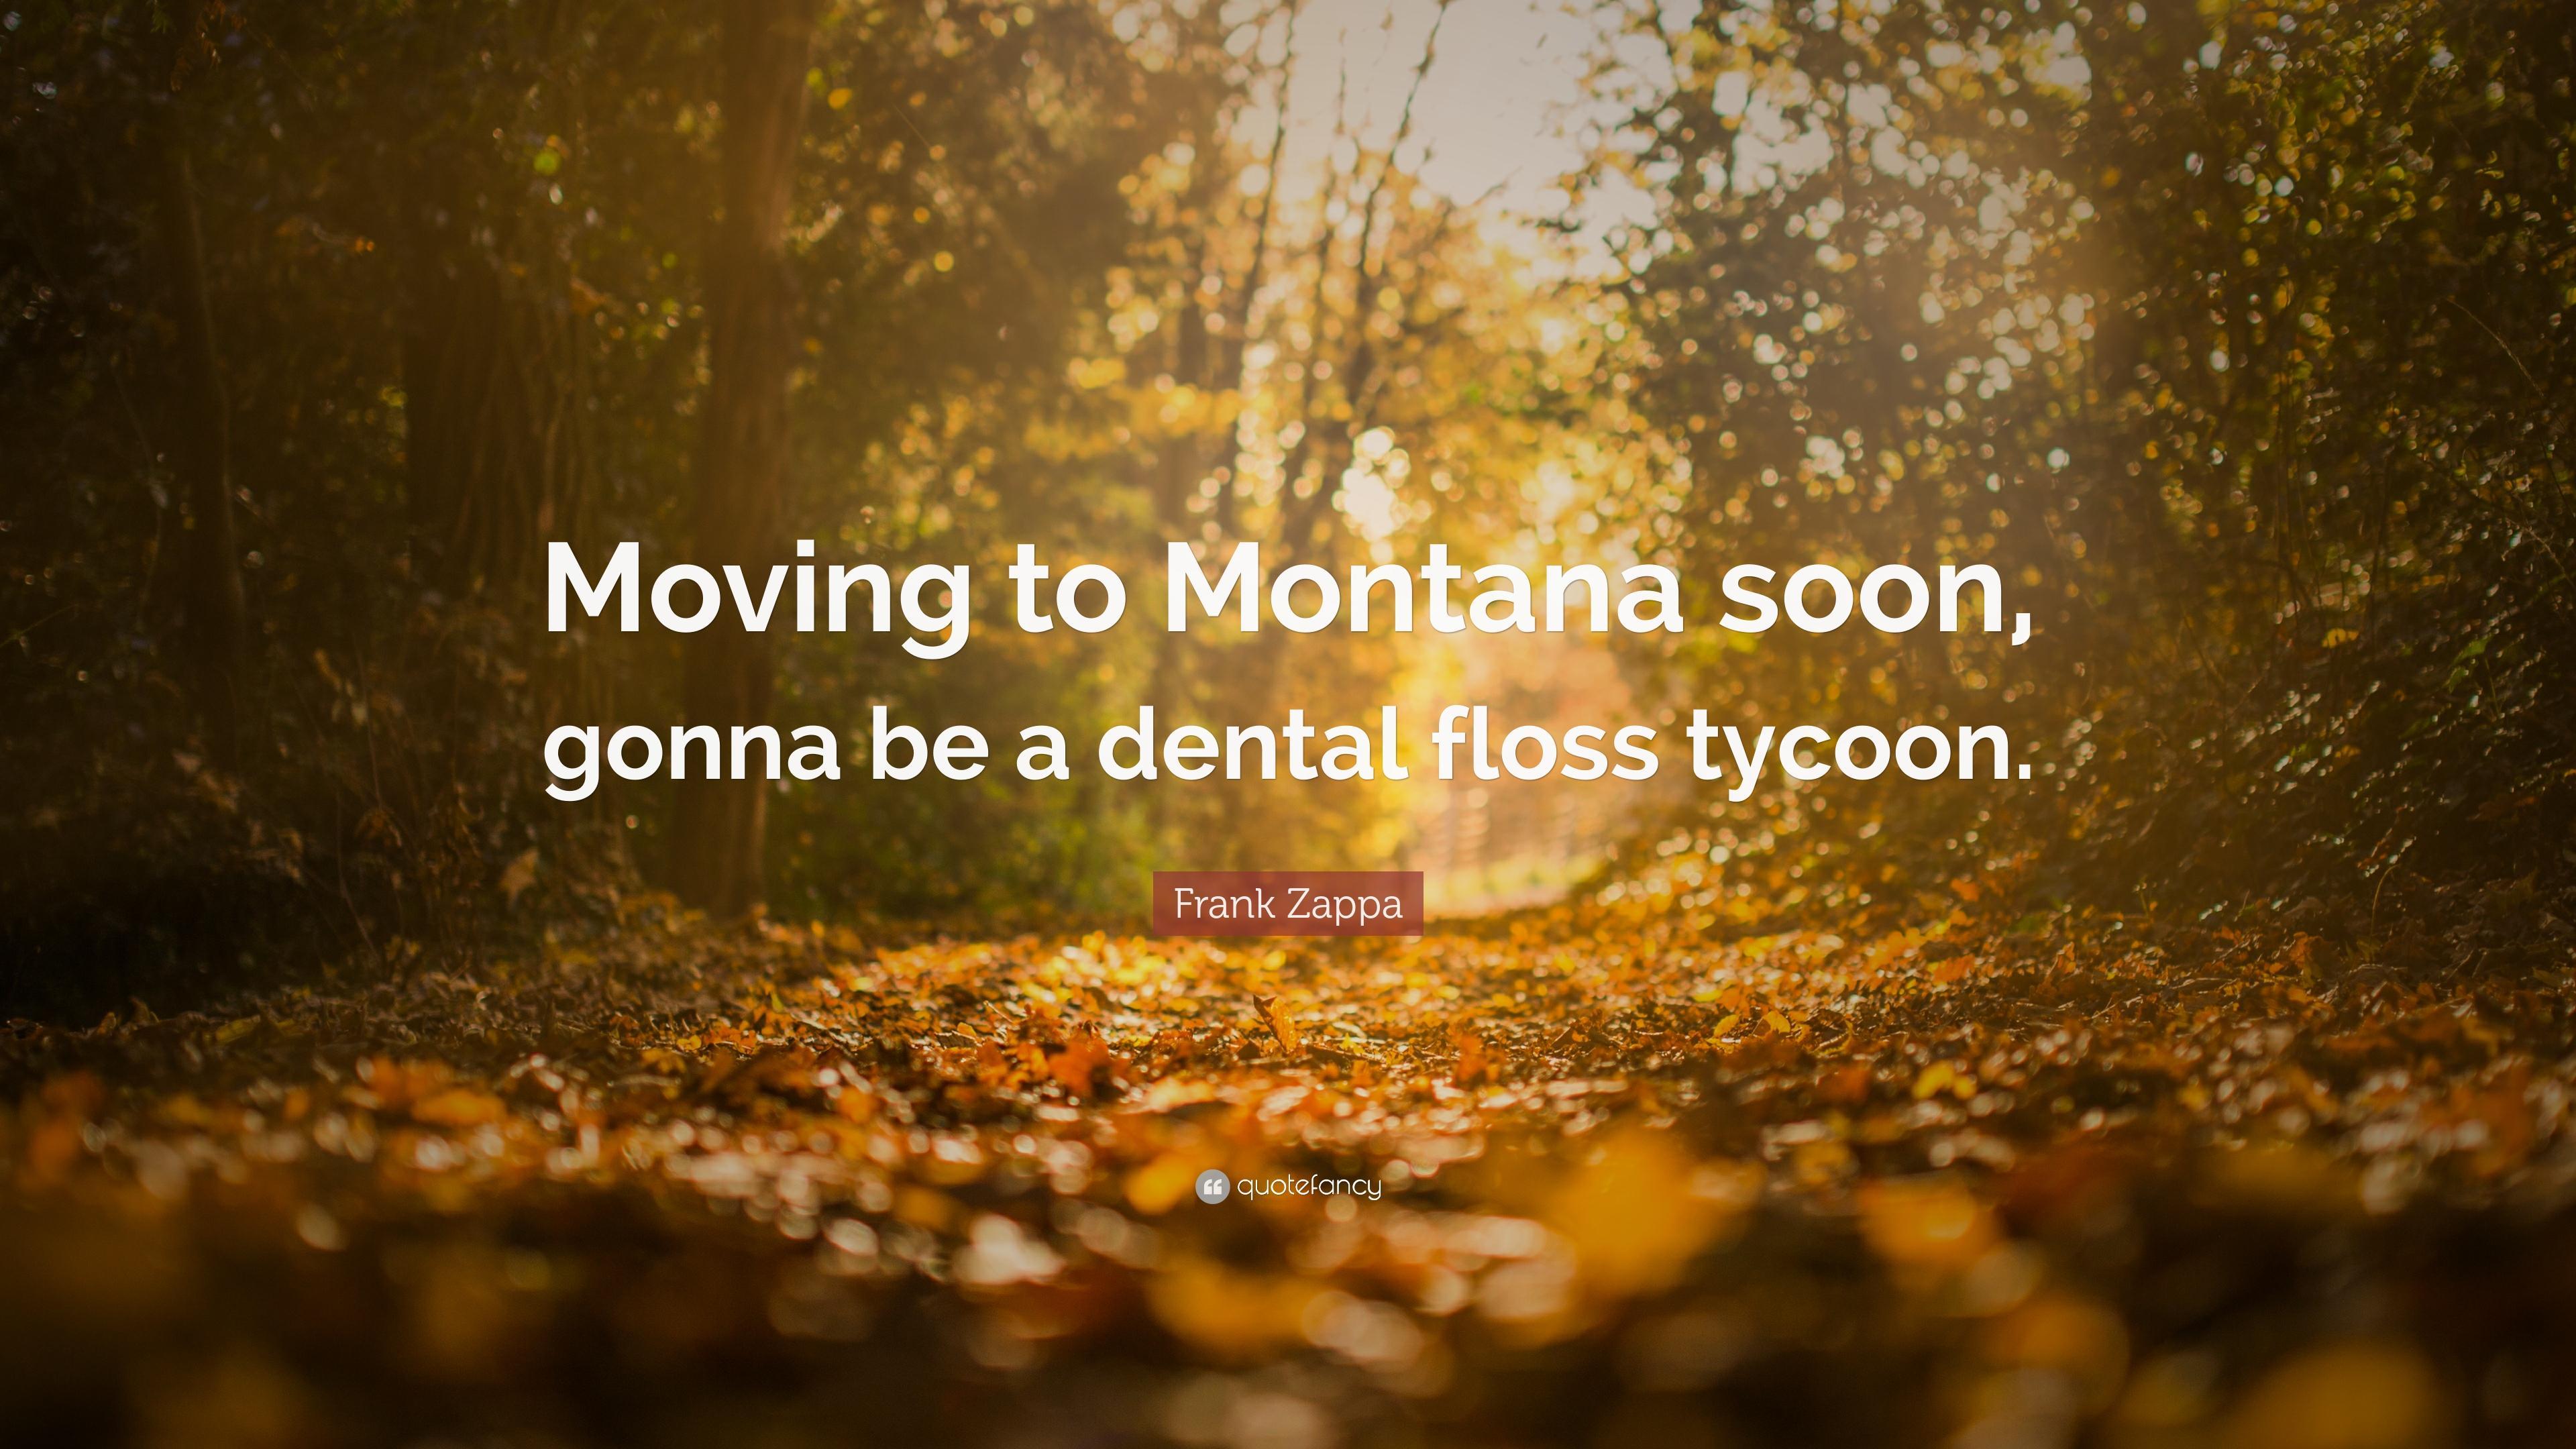 Frank Zappa Quote: “Moving to Montana soon, gonna be a dental floss